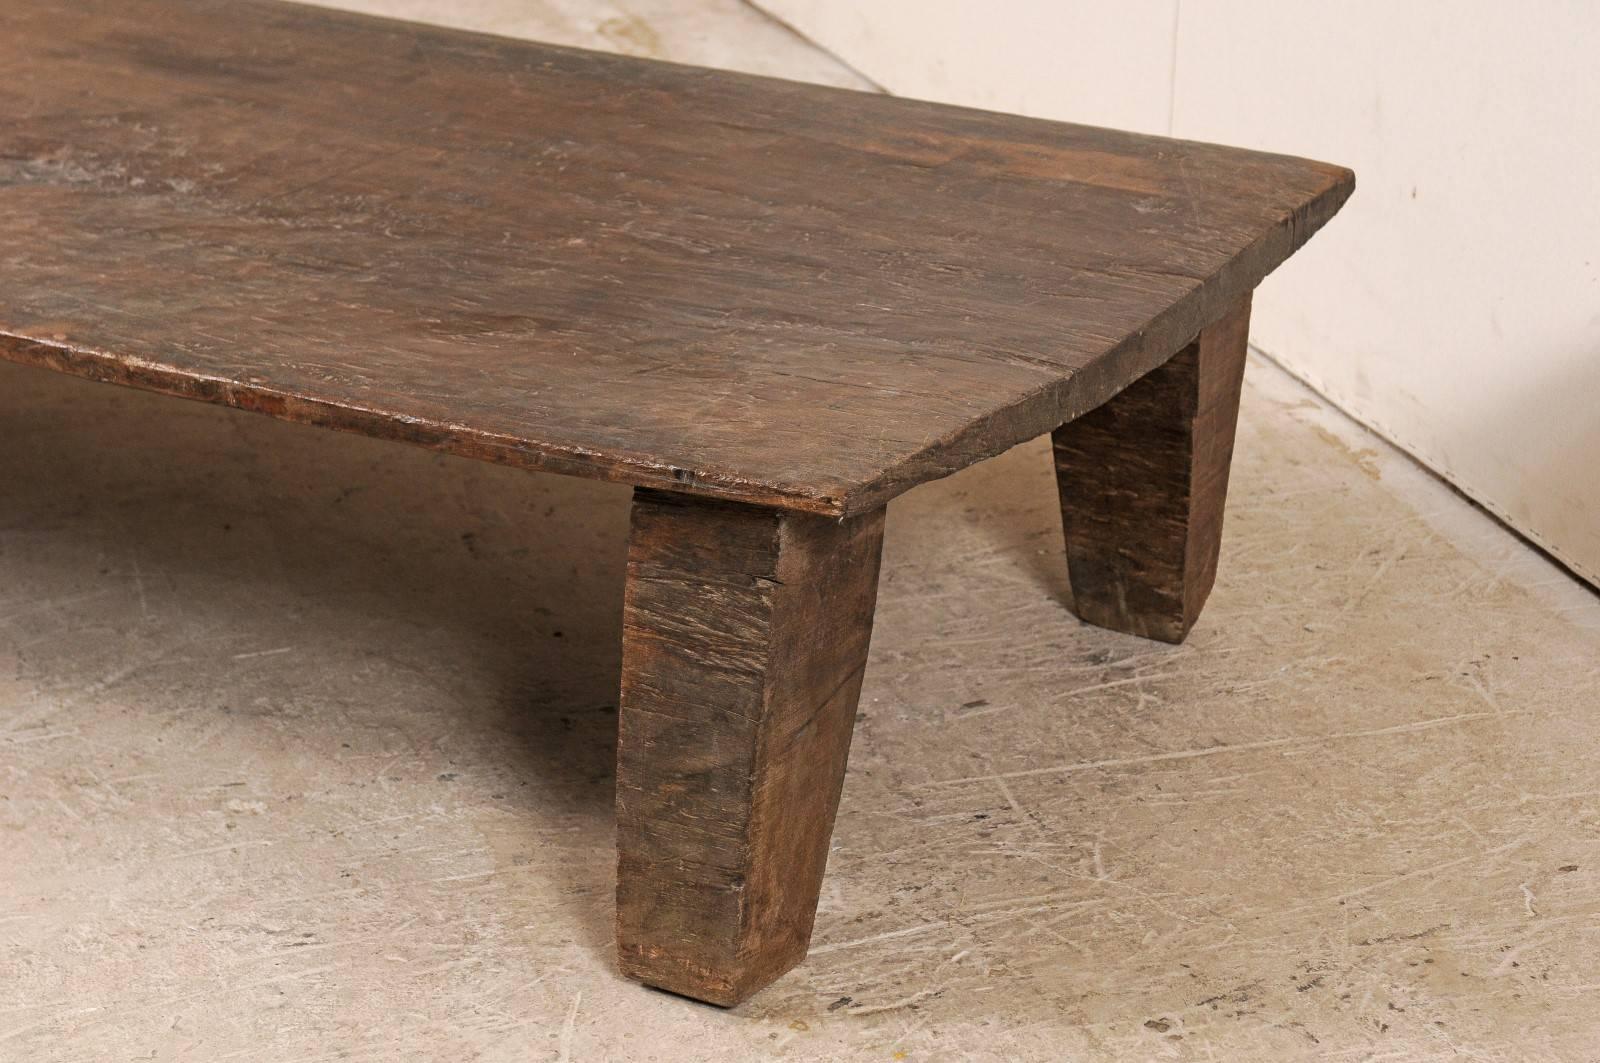 Carved Beautiful Rustic Primitive Naga Wood Coffee Table from the Tribes of North India